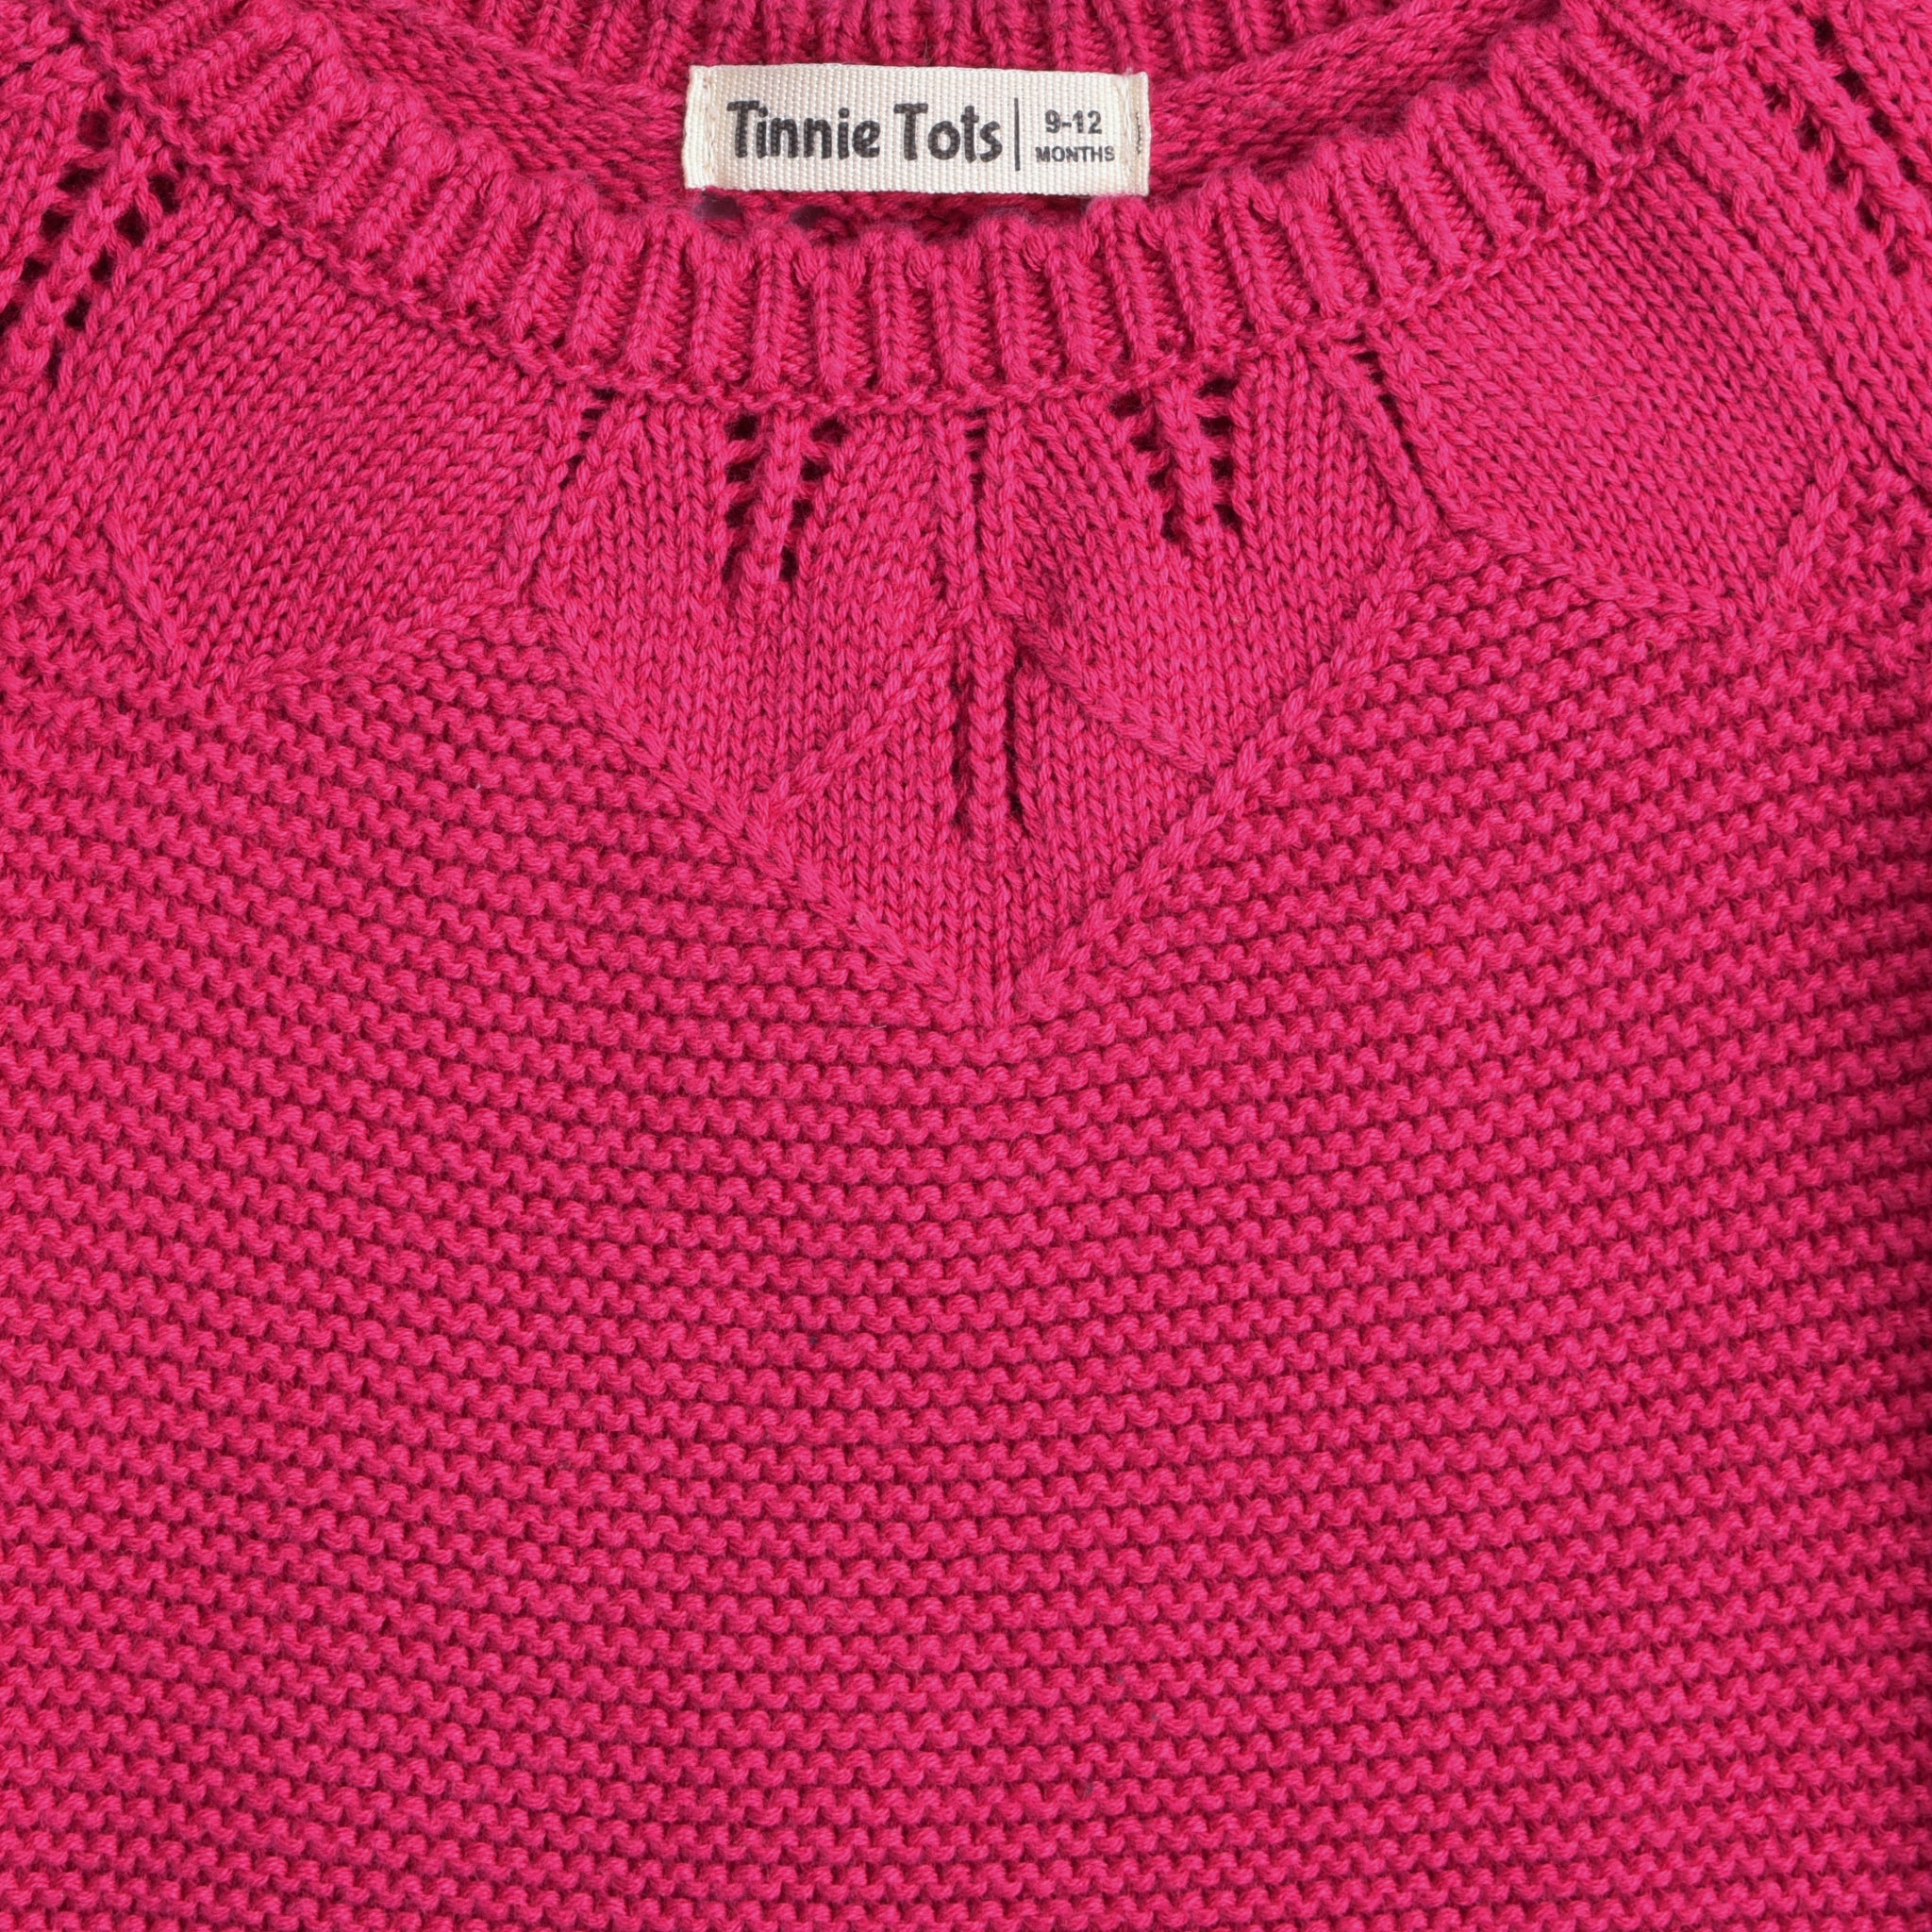 Hot Pink Knitted Sweater